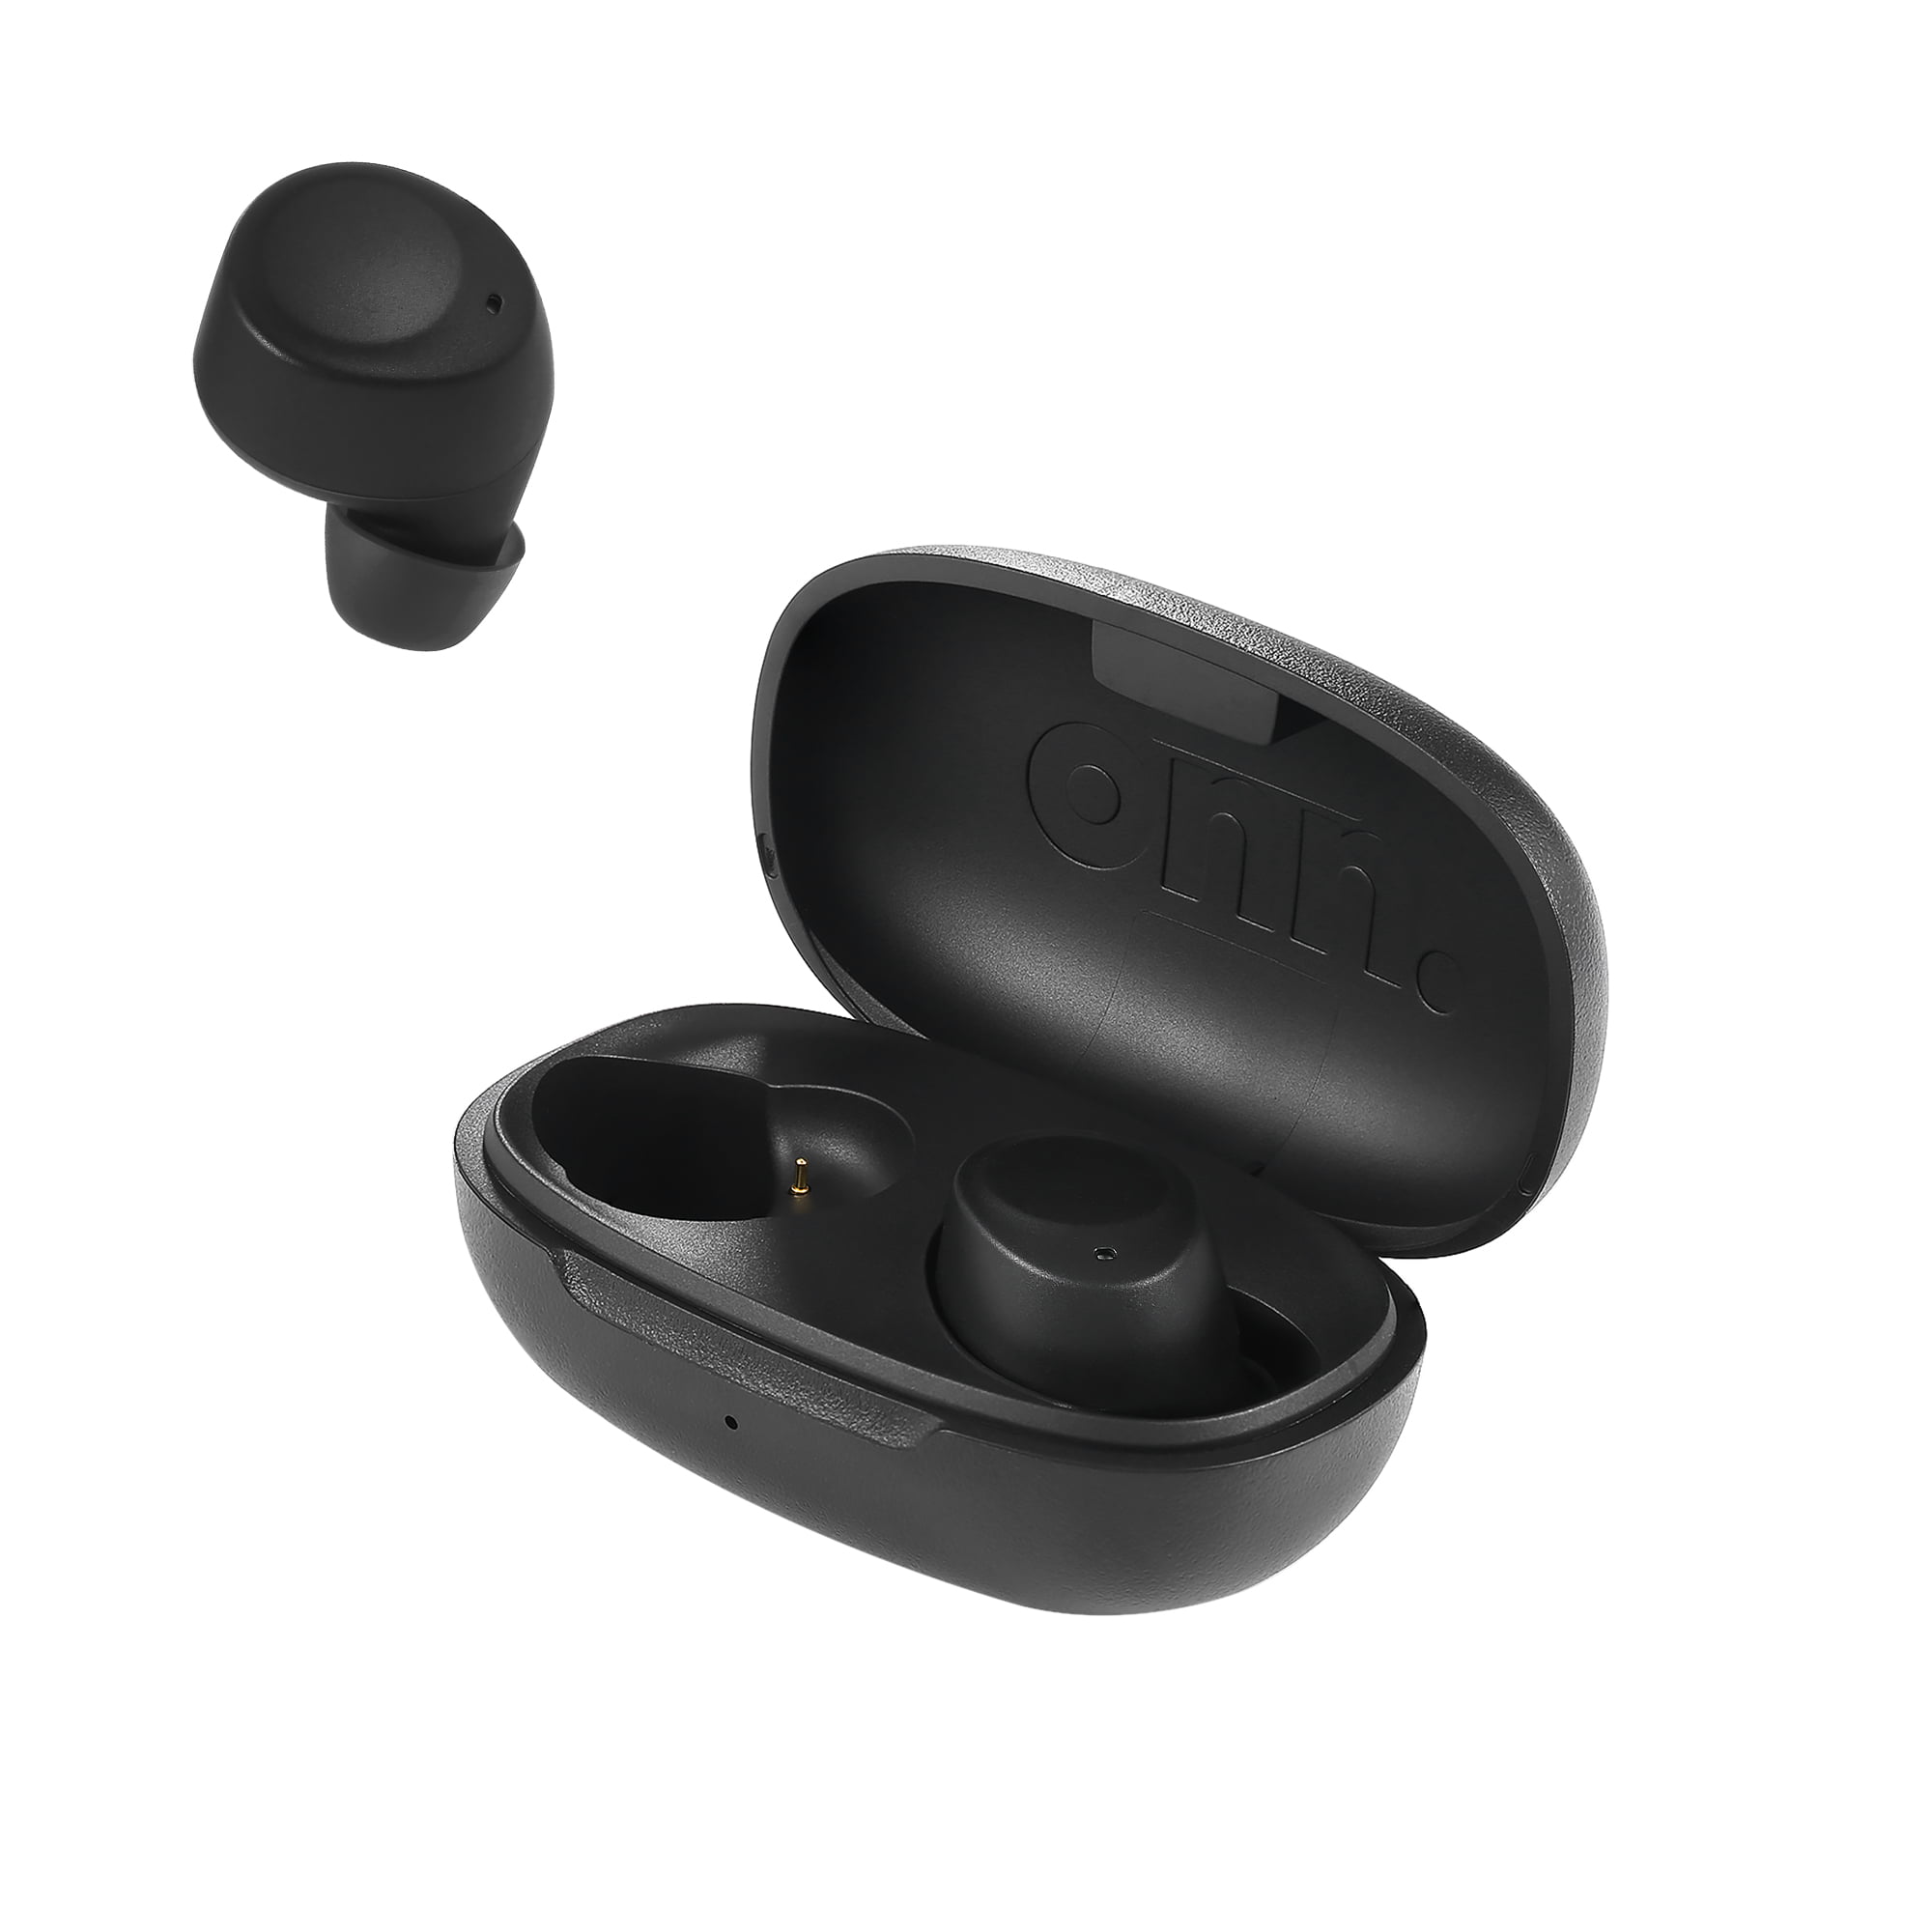 Onn True Wireless Earbuds with Charging Case